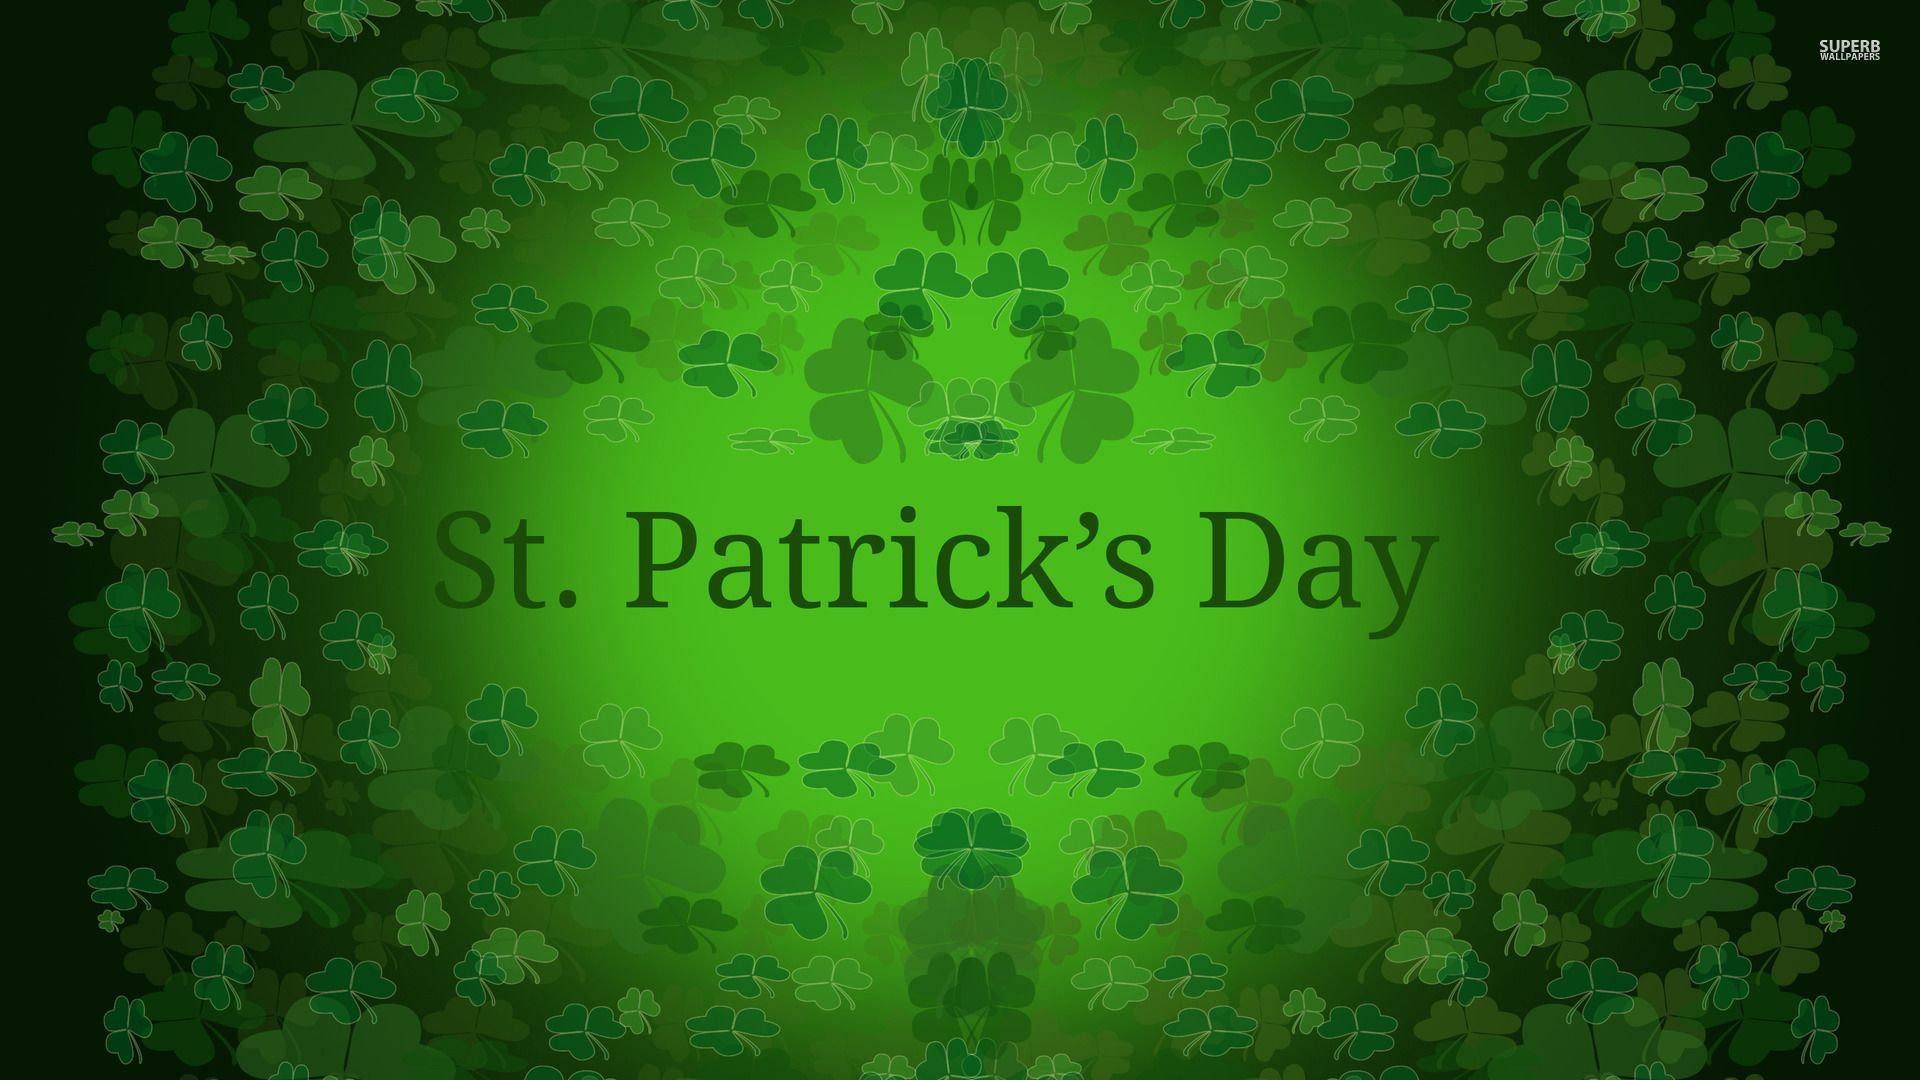 st. patricks day wallpapers hd on james st patrick wallpapers